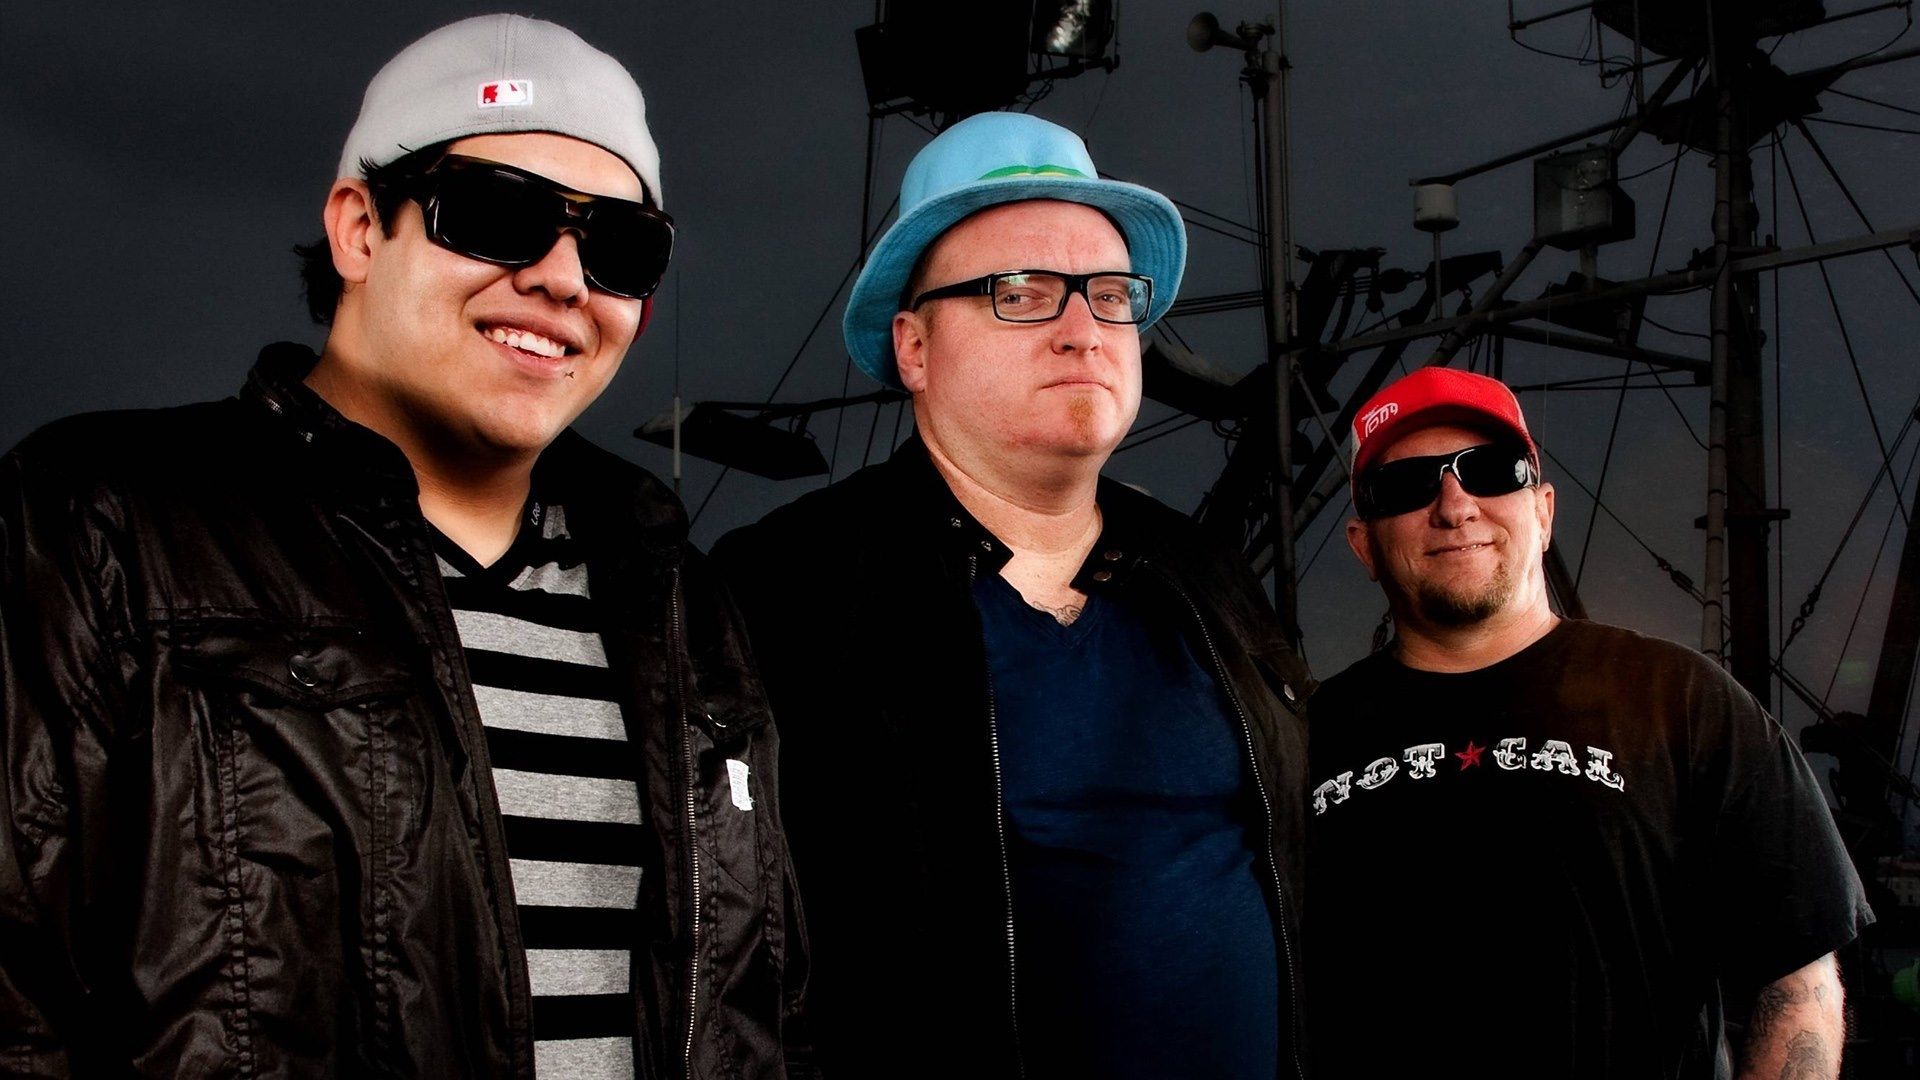 Download Wallpaper 1920x1080 Sublime with rome, Glasses, T-shirt ...